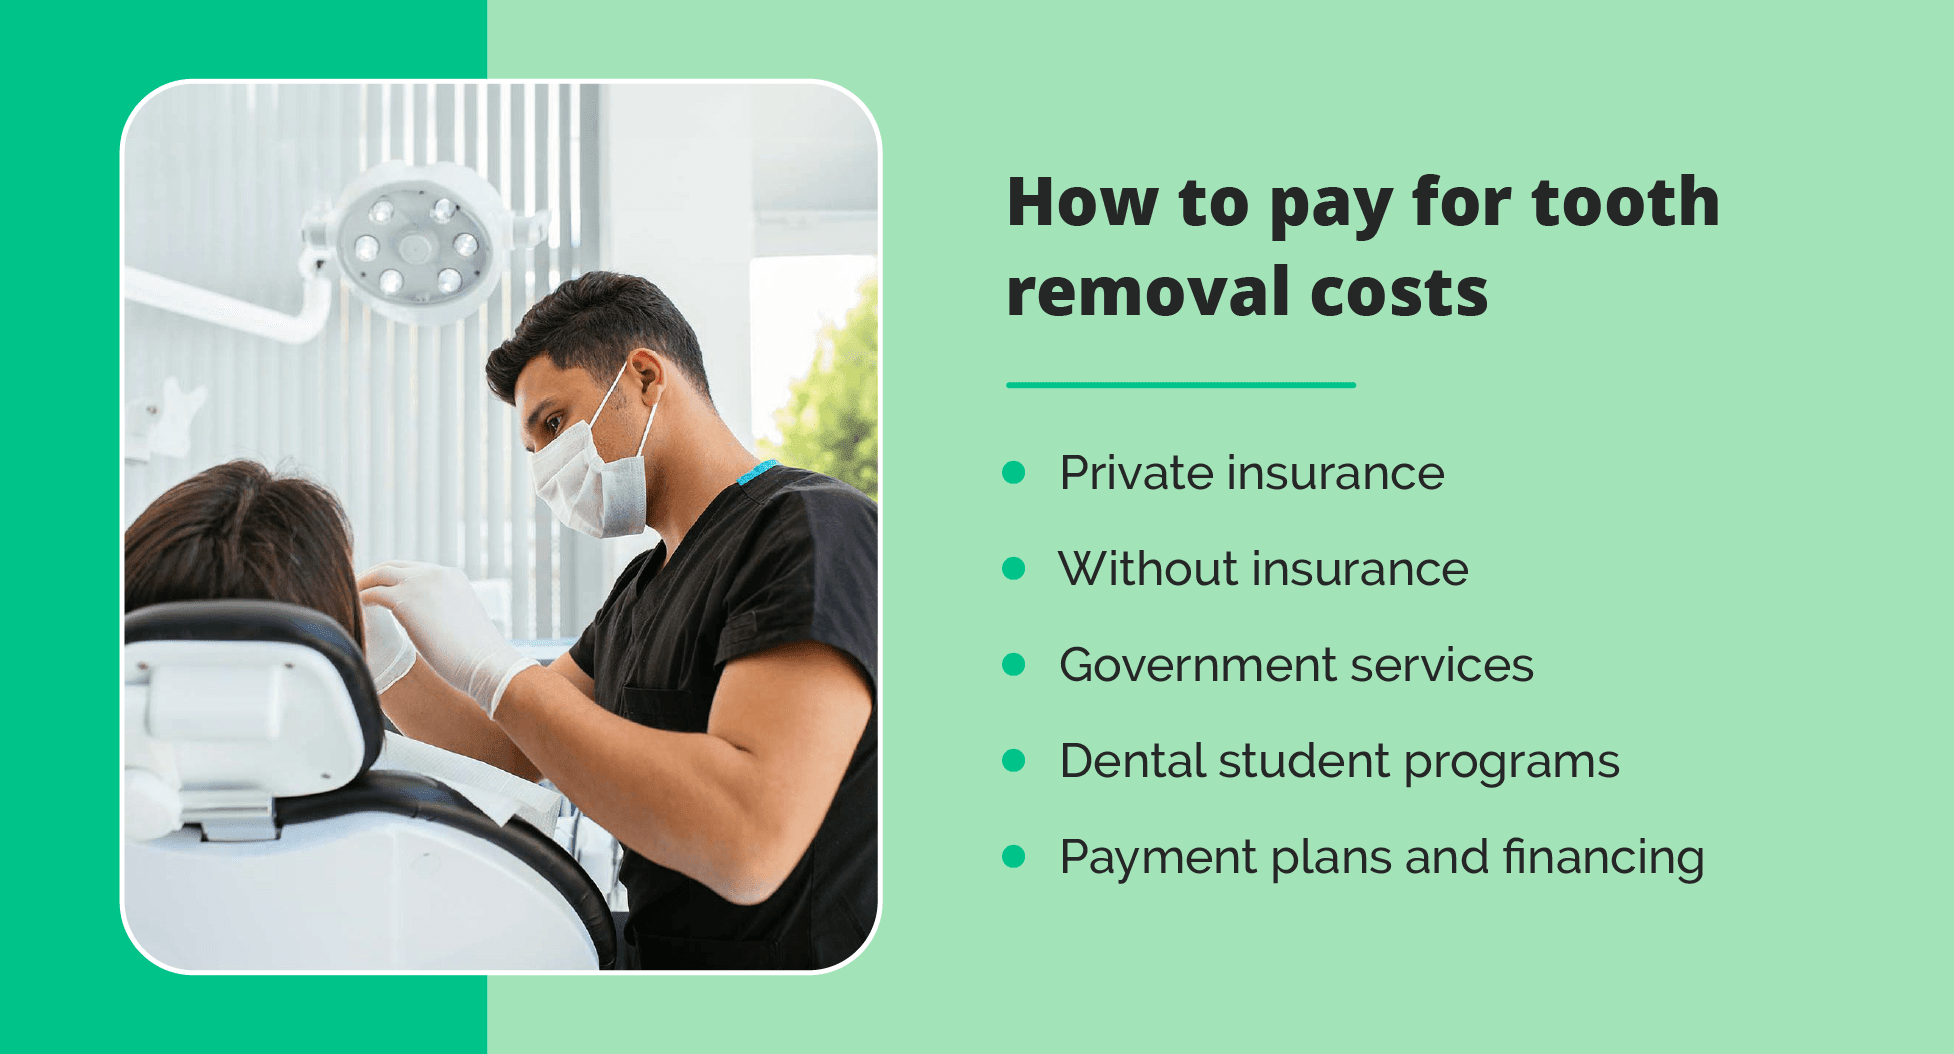 Illustration: How to pay for tooth removal costs - Private insurance; without insurance; government services; dental student programs; payment plans and financing